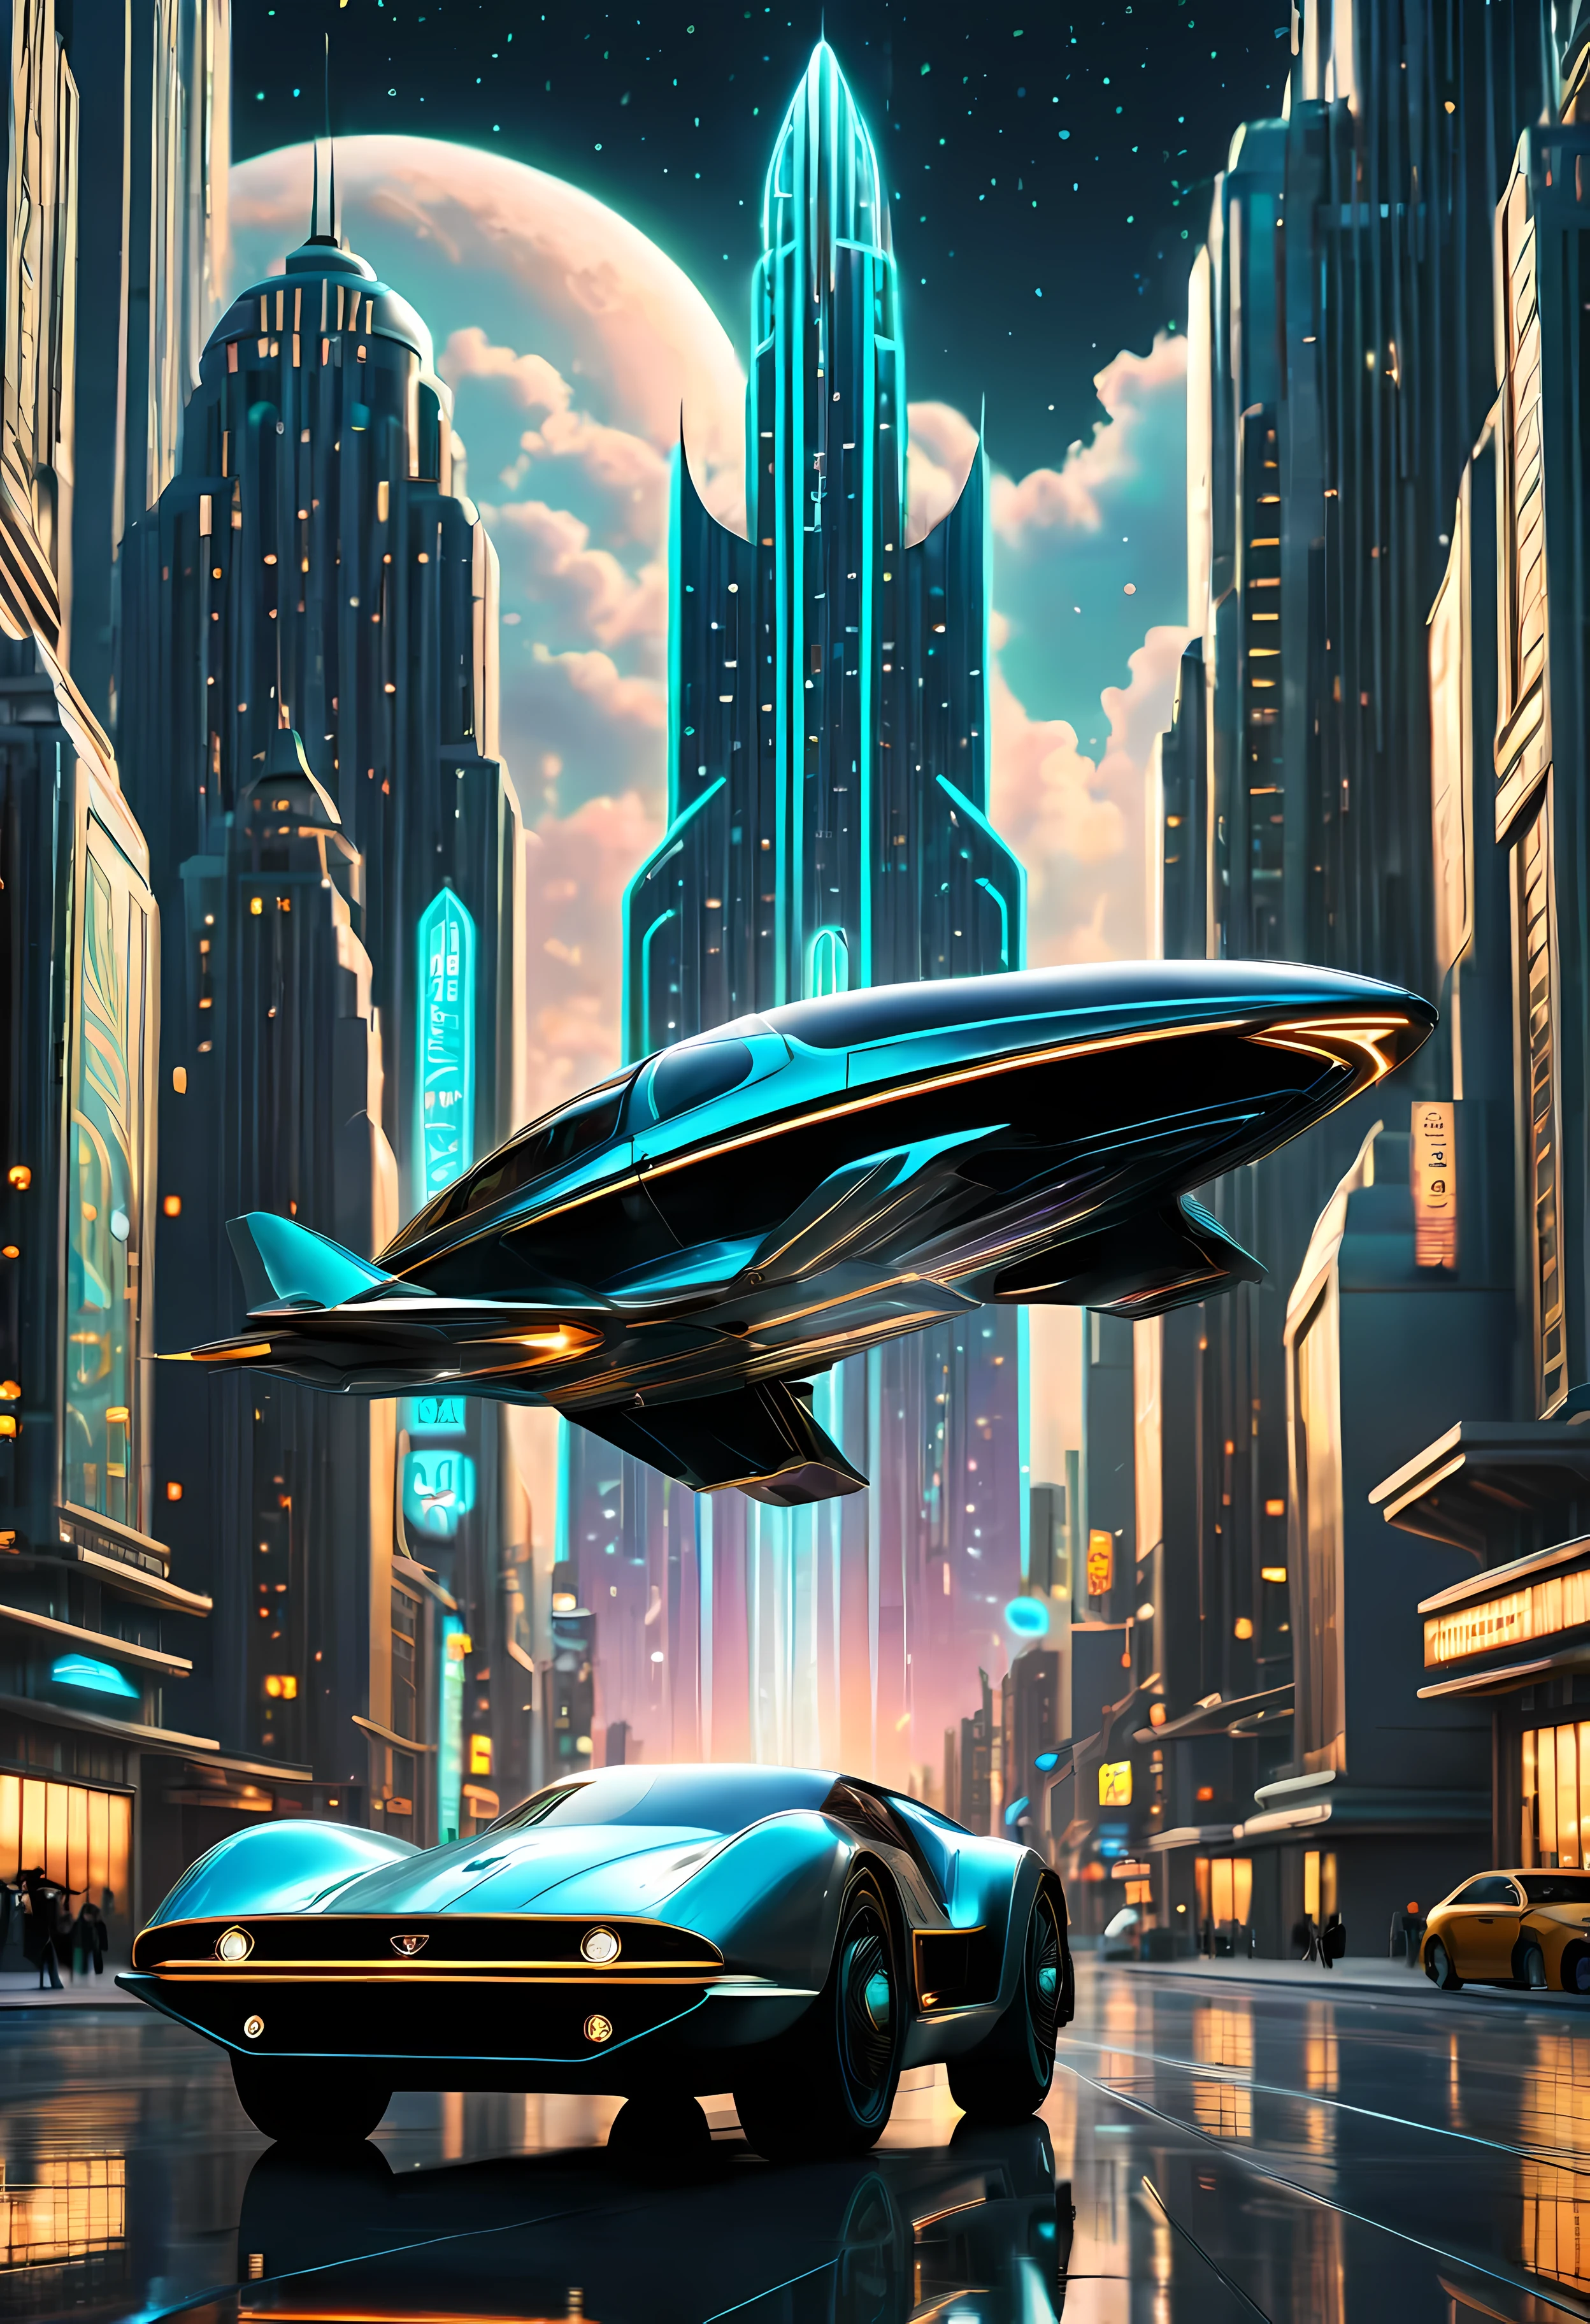 art deco style flying car, art deco style science fiction, art deco style future skyscrapers

(best quality,4k,8k,highres,masterpiece:1.2),ultra-detailed,(realistic,photorealistic,photo-realistic:1.37),HDR,UHD,studio lighting,ultra-fine painting,sharp focus,physically-based rendering,extreme detail description,professional,vivid colors,bokeh,art deco style,art deco architecture,streamlined design,sleek lines,geometric shapes,chrome accents,luxurious interior,retro-futuristic,glowing neon lights,urban environment,futuristic cityscape,skyscrapers reaching the clouds,flying car hovering in the air,graceful movement,advanced propulsion system,lustrous metallic body,polished surfaces,sci-fi inspired,high-tech gadgets,integrated holographic displays,innovative energy source,propeller-less design,elegant wings spreading gracefully,sparkling starry night background,reflections on the car's surface,exquisite attention to detail,captivating sense of motion,aesthetic harmony,endless possibilities of the future,awe-inspiring creation.